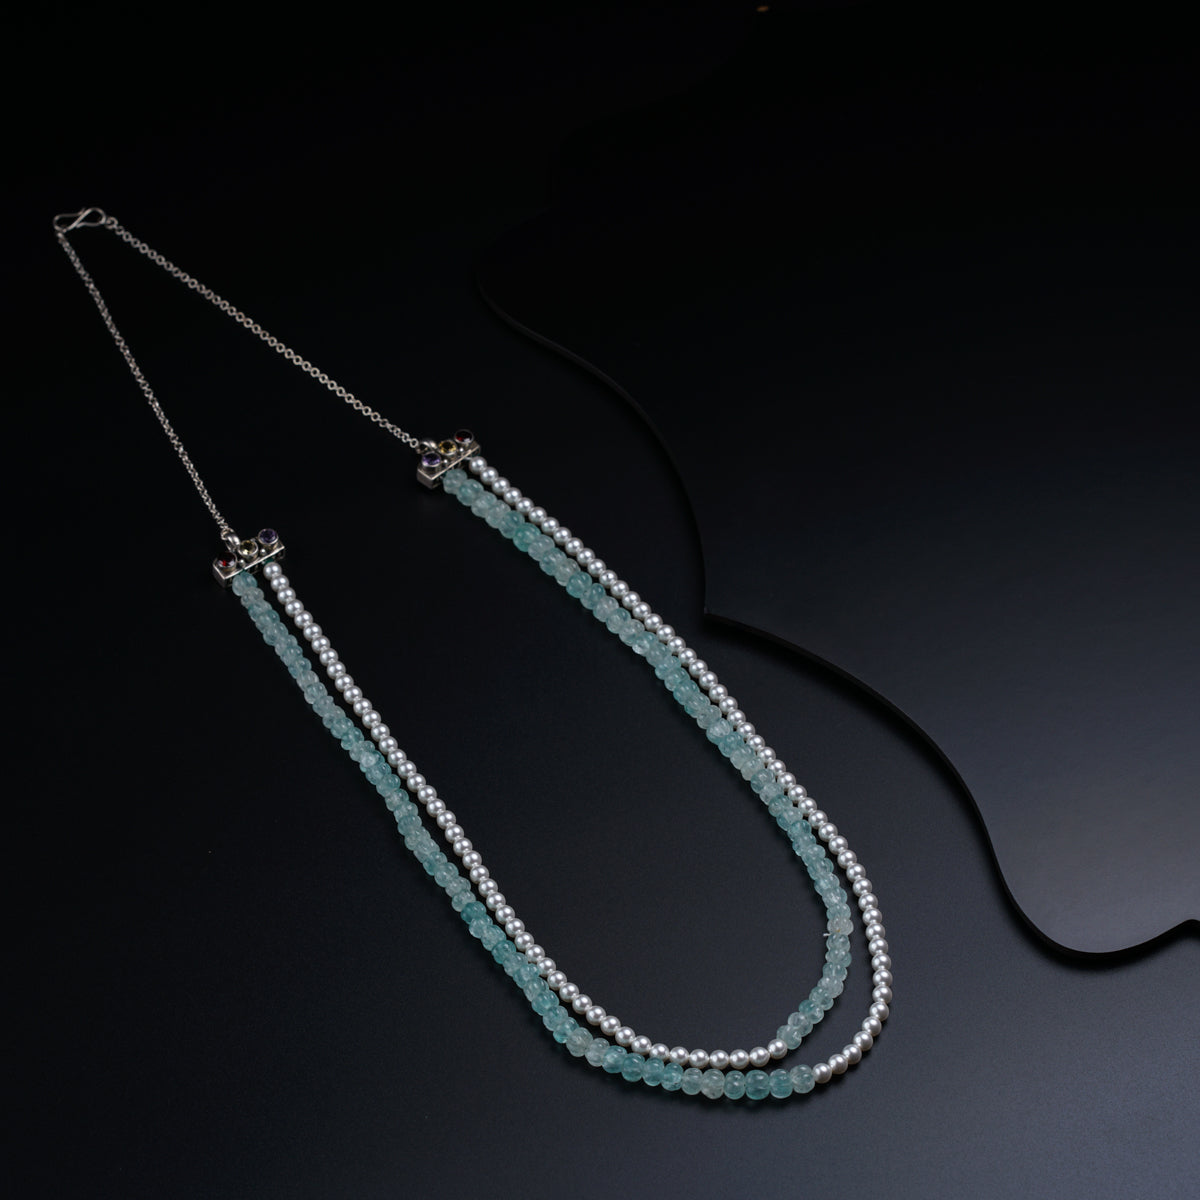 a long necklace with beads on a black surface